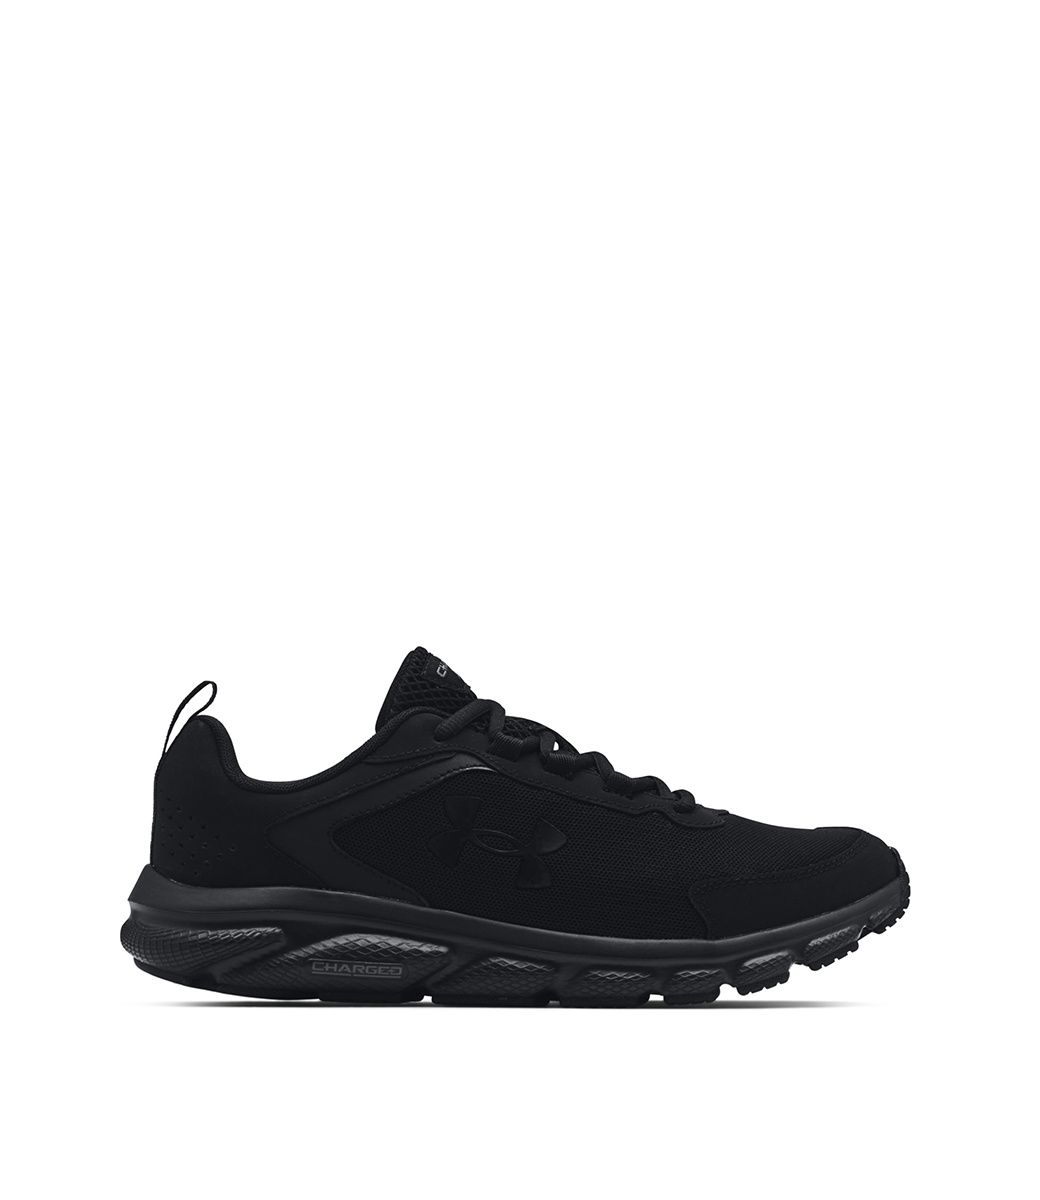 UNDER ARMOUR CHARGED ASSERT 9 BLACK/BLACK - Laura-Jo Shoes